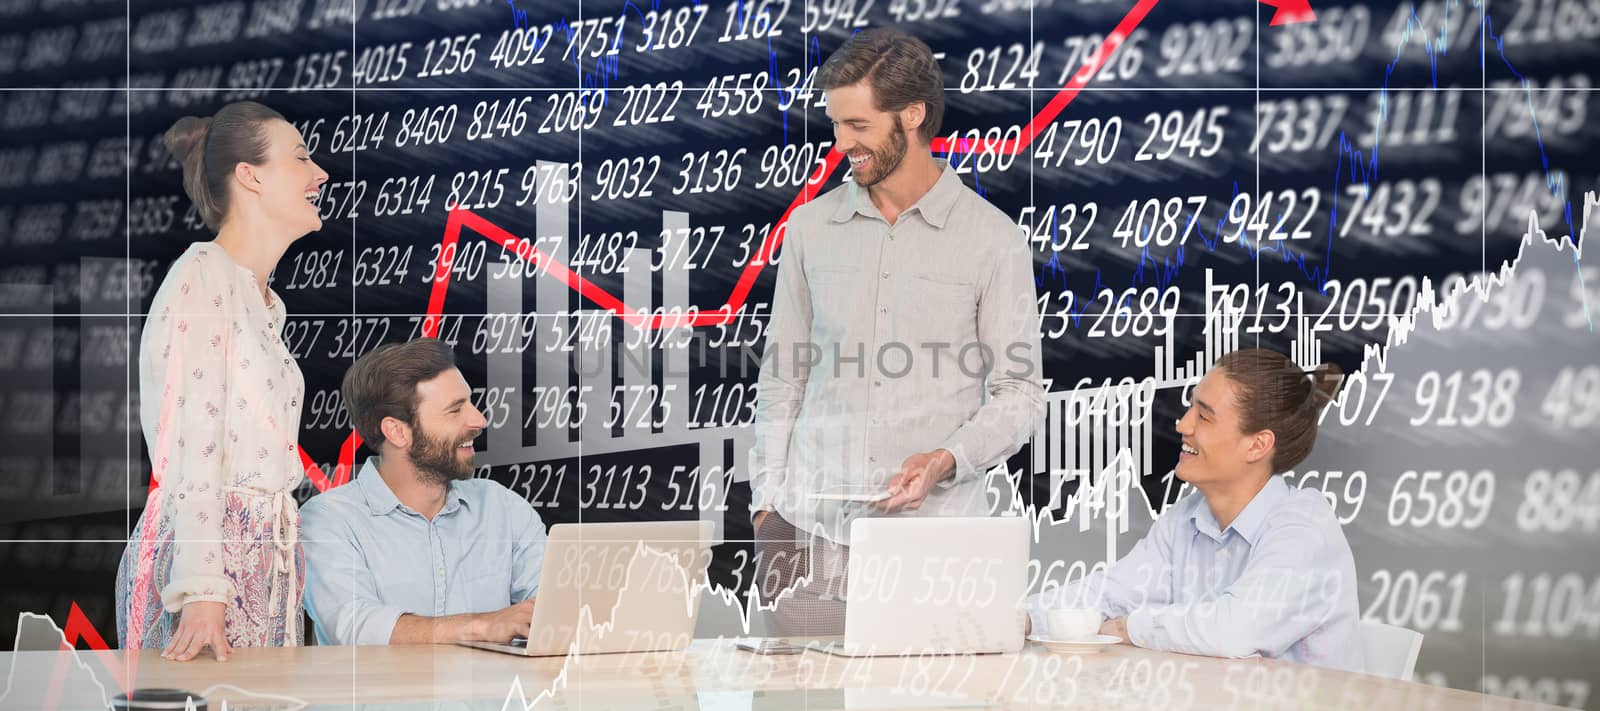 Composite image of business people interacting at table by Wavebreakmedia